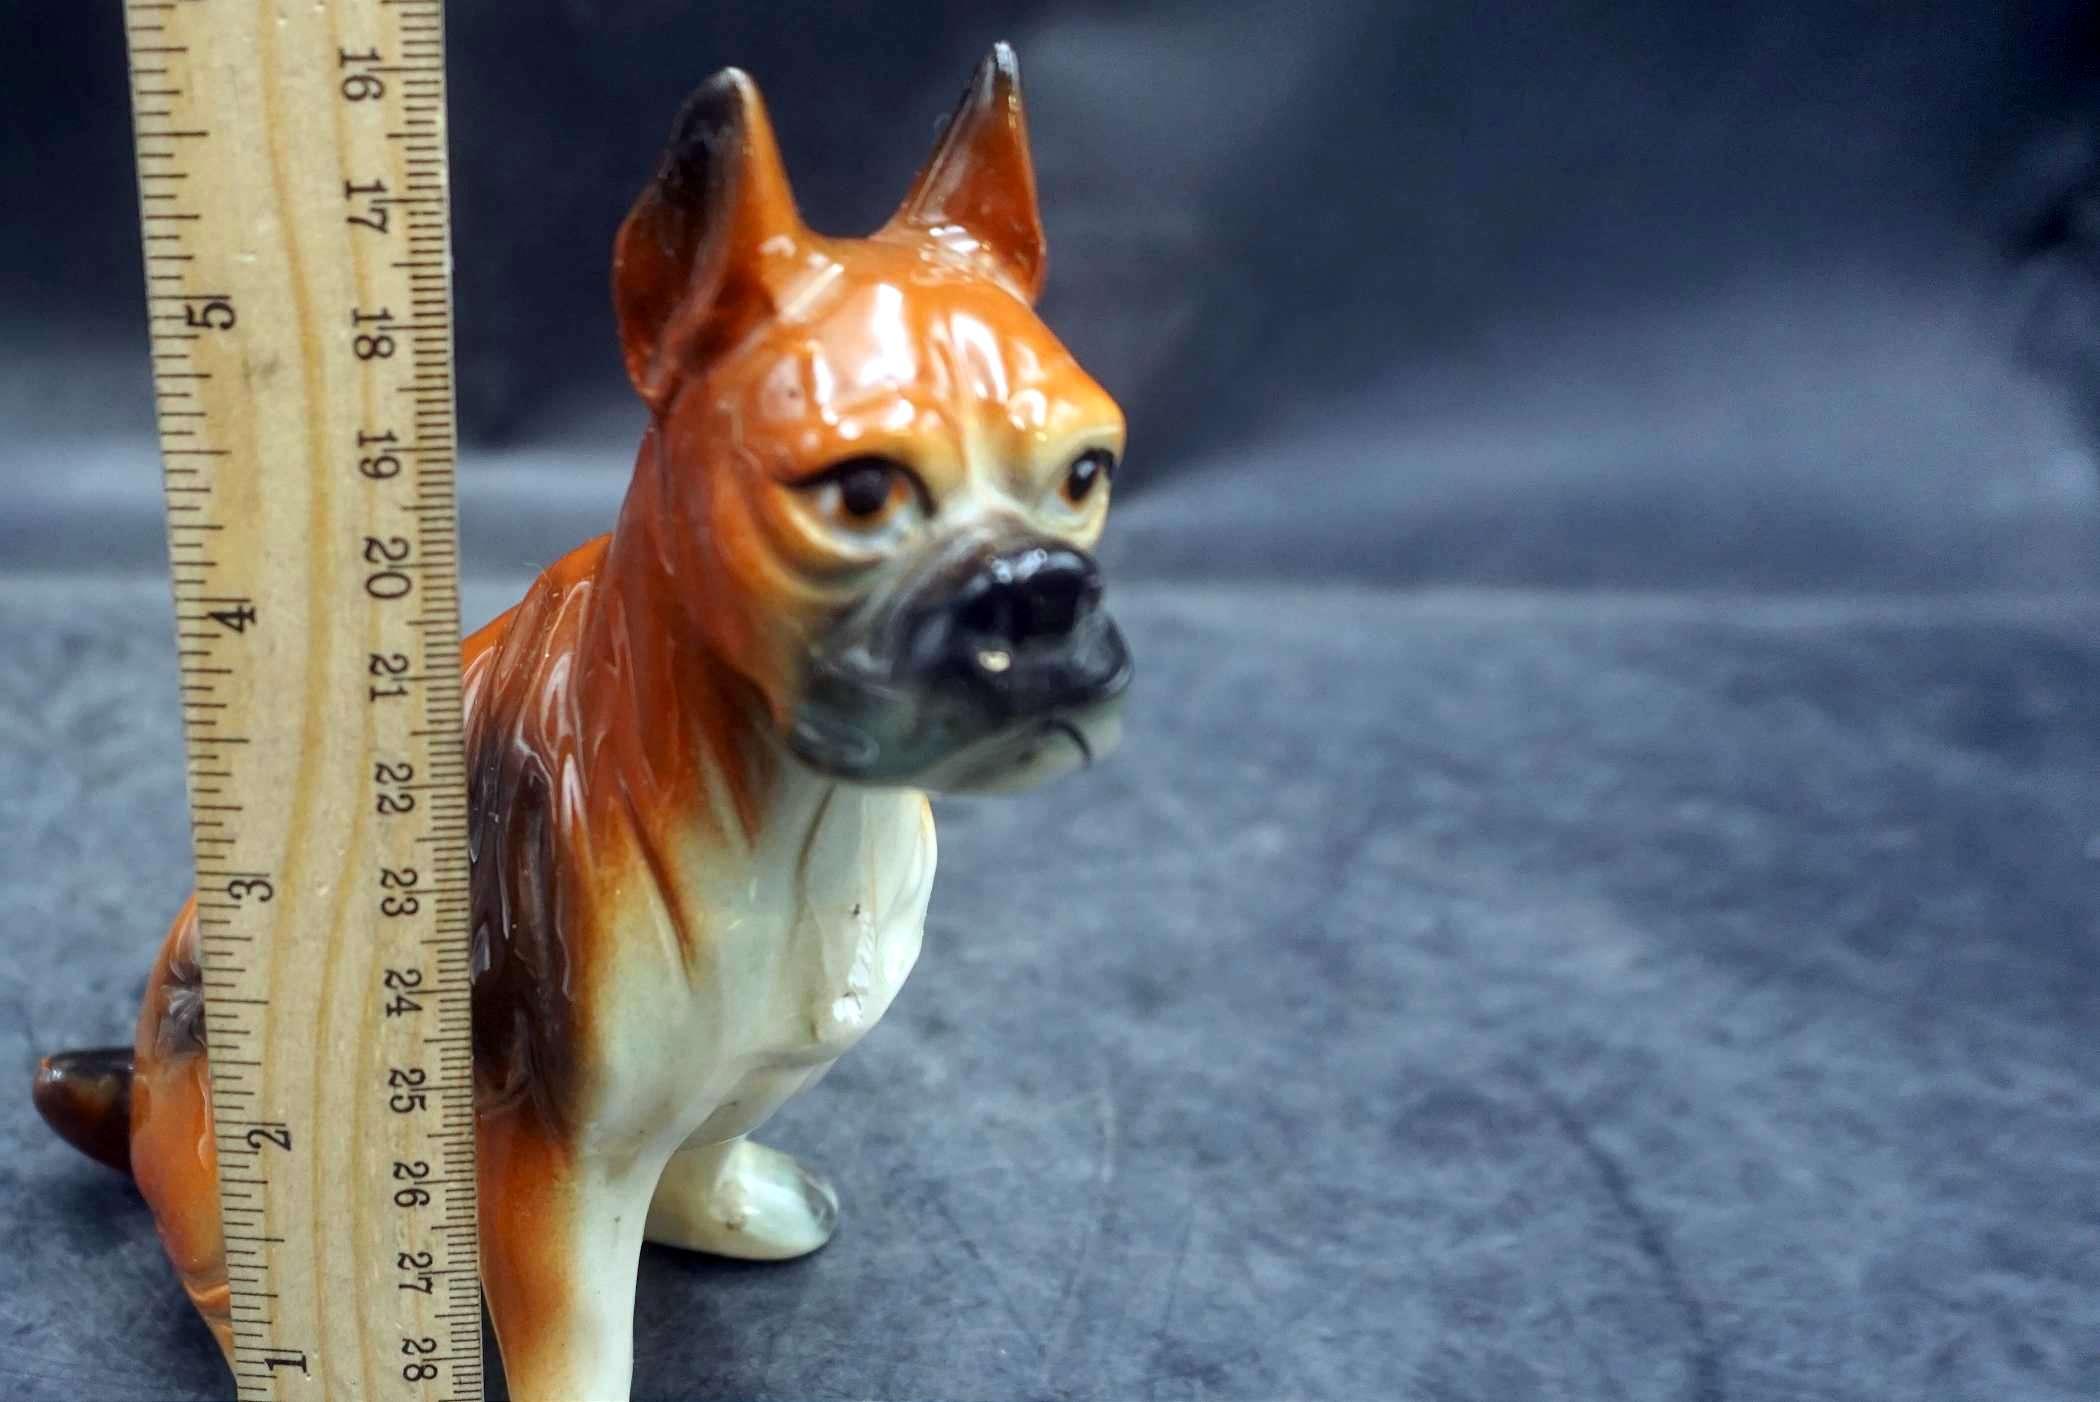 Boxer Dog Figurine - chip on chest